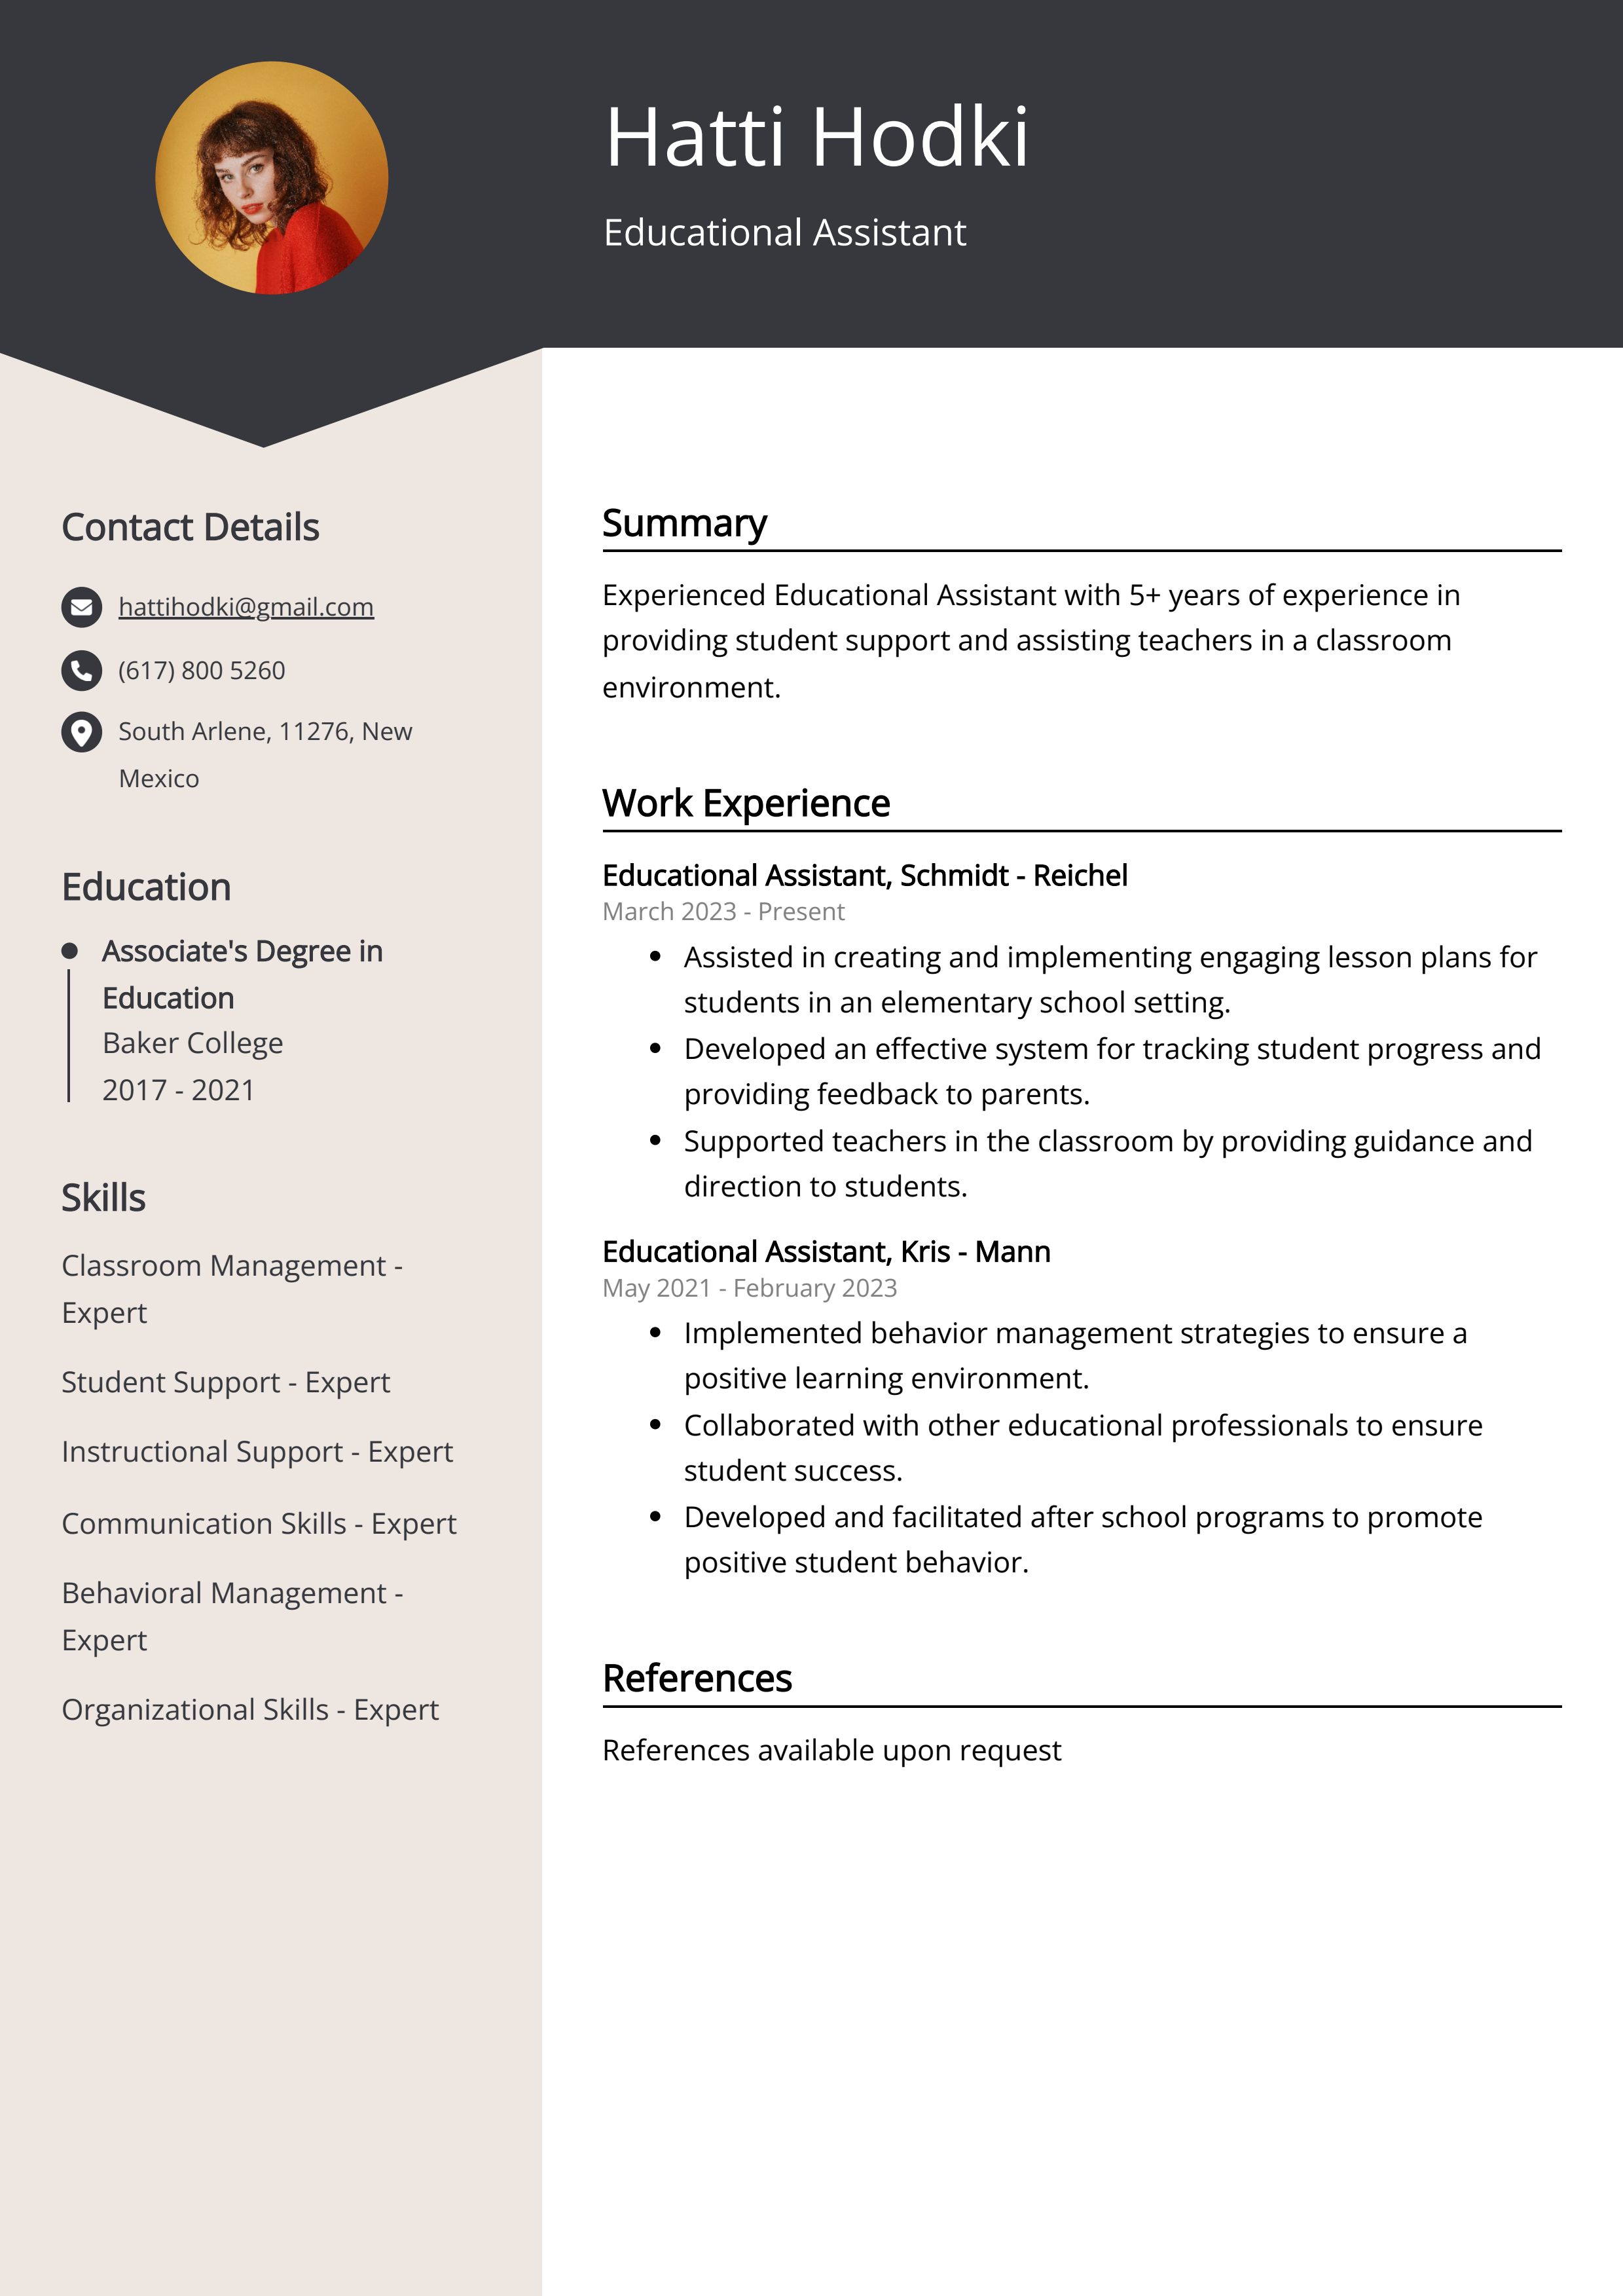 Educational Assistant CV Example